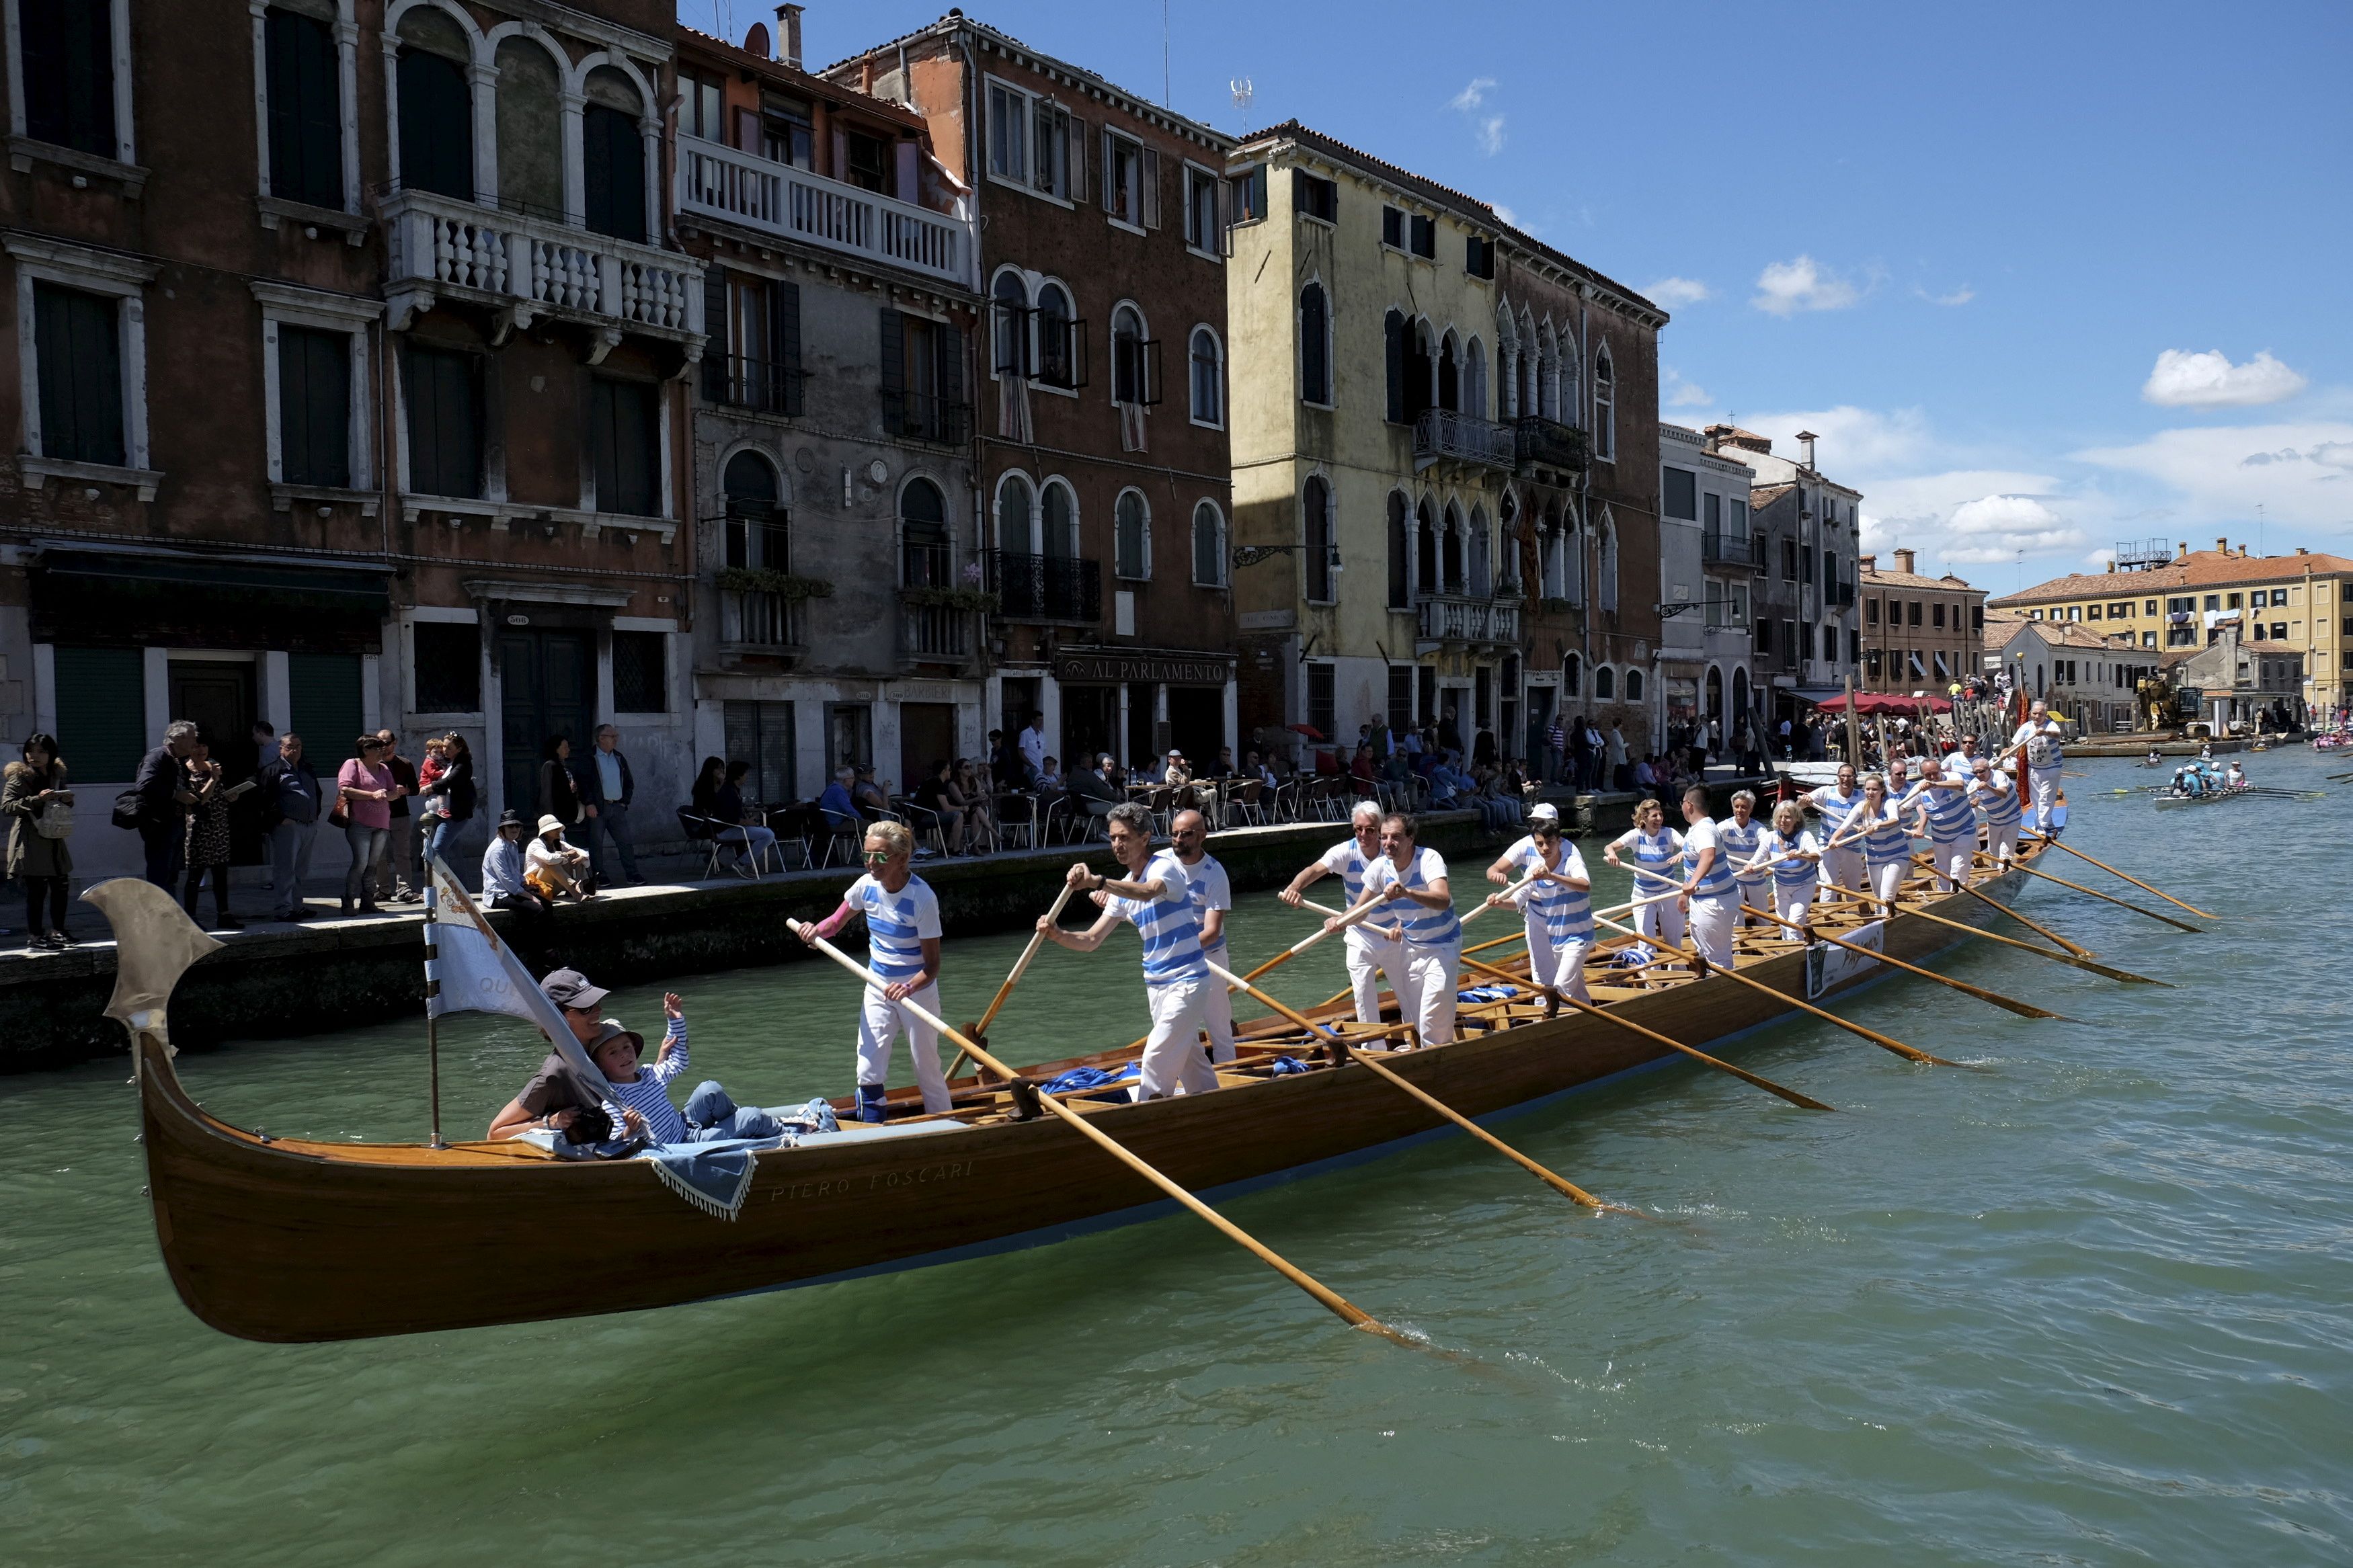 Rowers take part in the Vogalonga, or Long Row, in the Venice lagoon